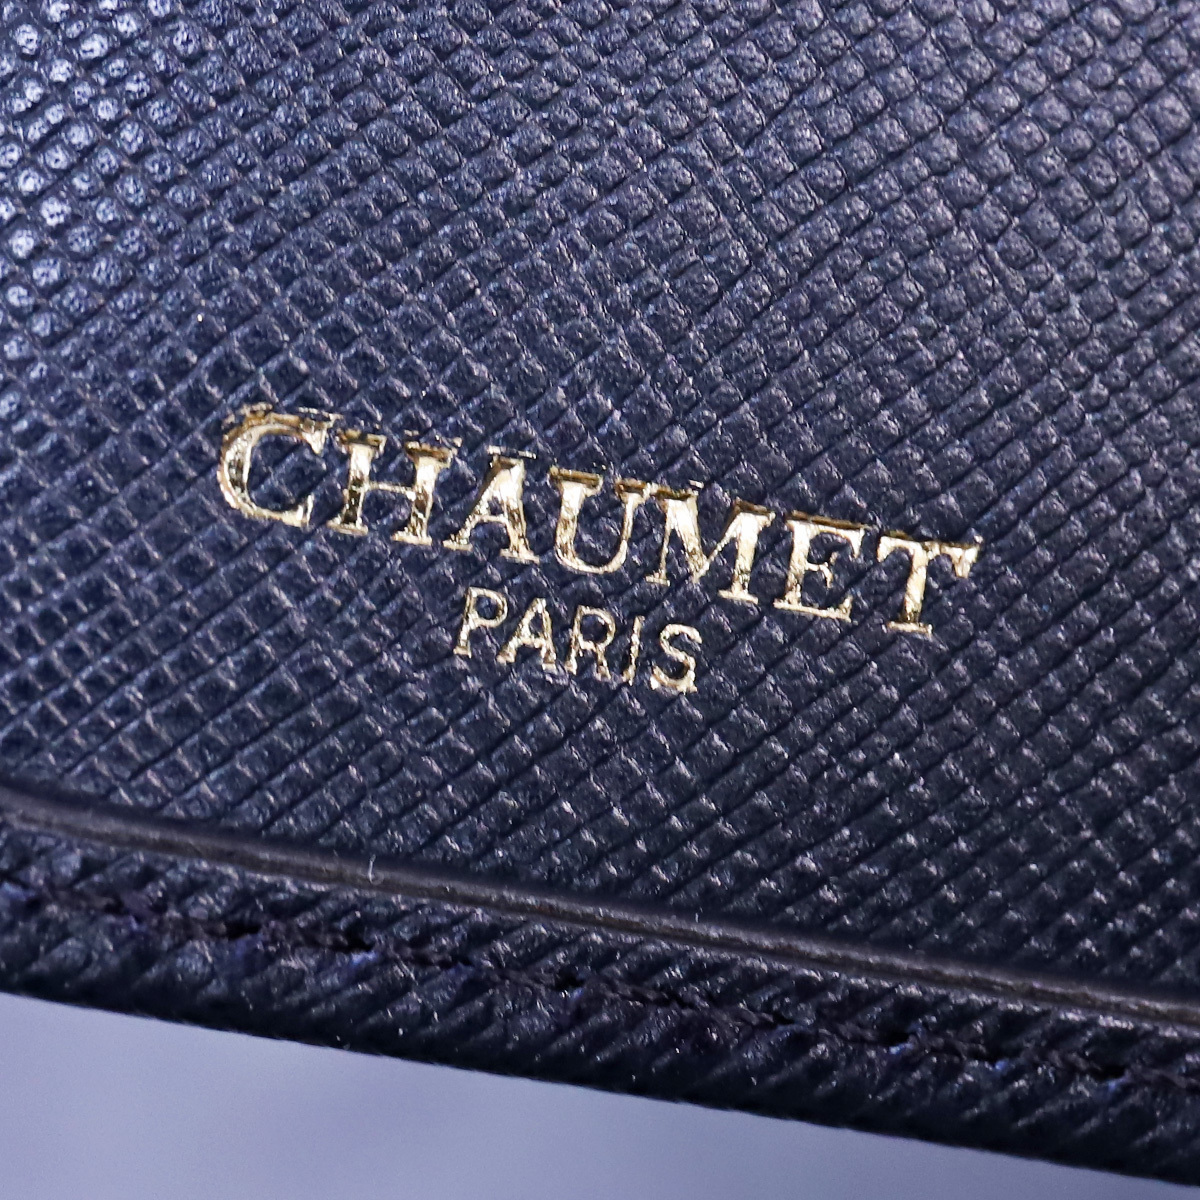  genuine article new goods Chaumet ultimate rare top class gray n car f leather men's wallet black folding in half folded wallet . inserting preservation box attaching CHAUMET